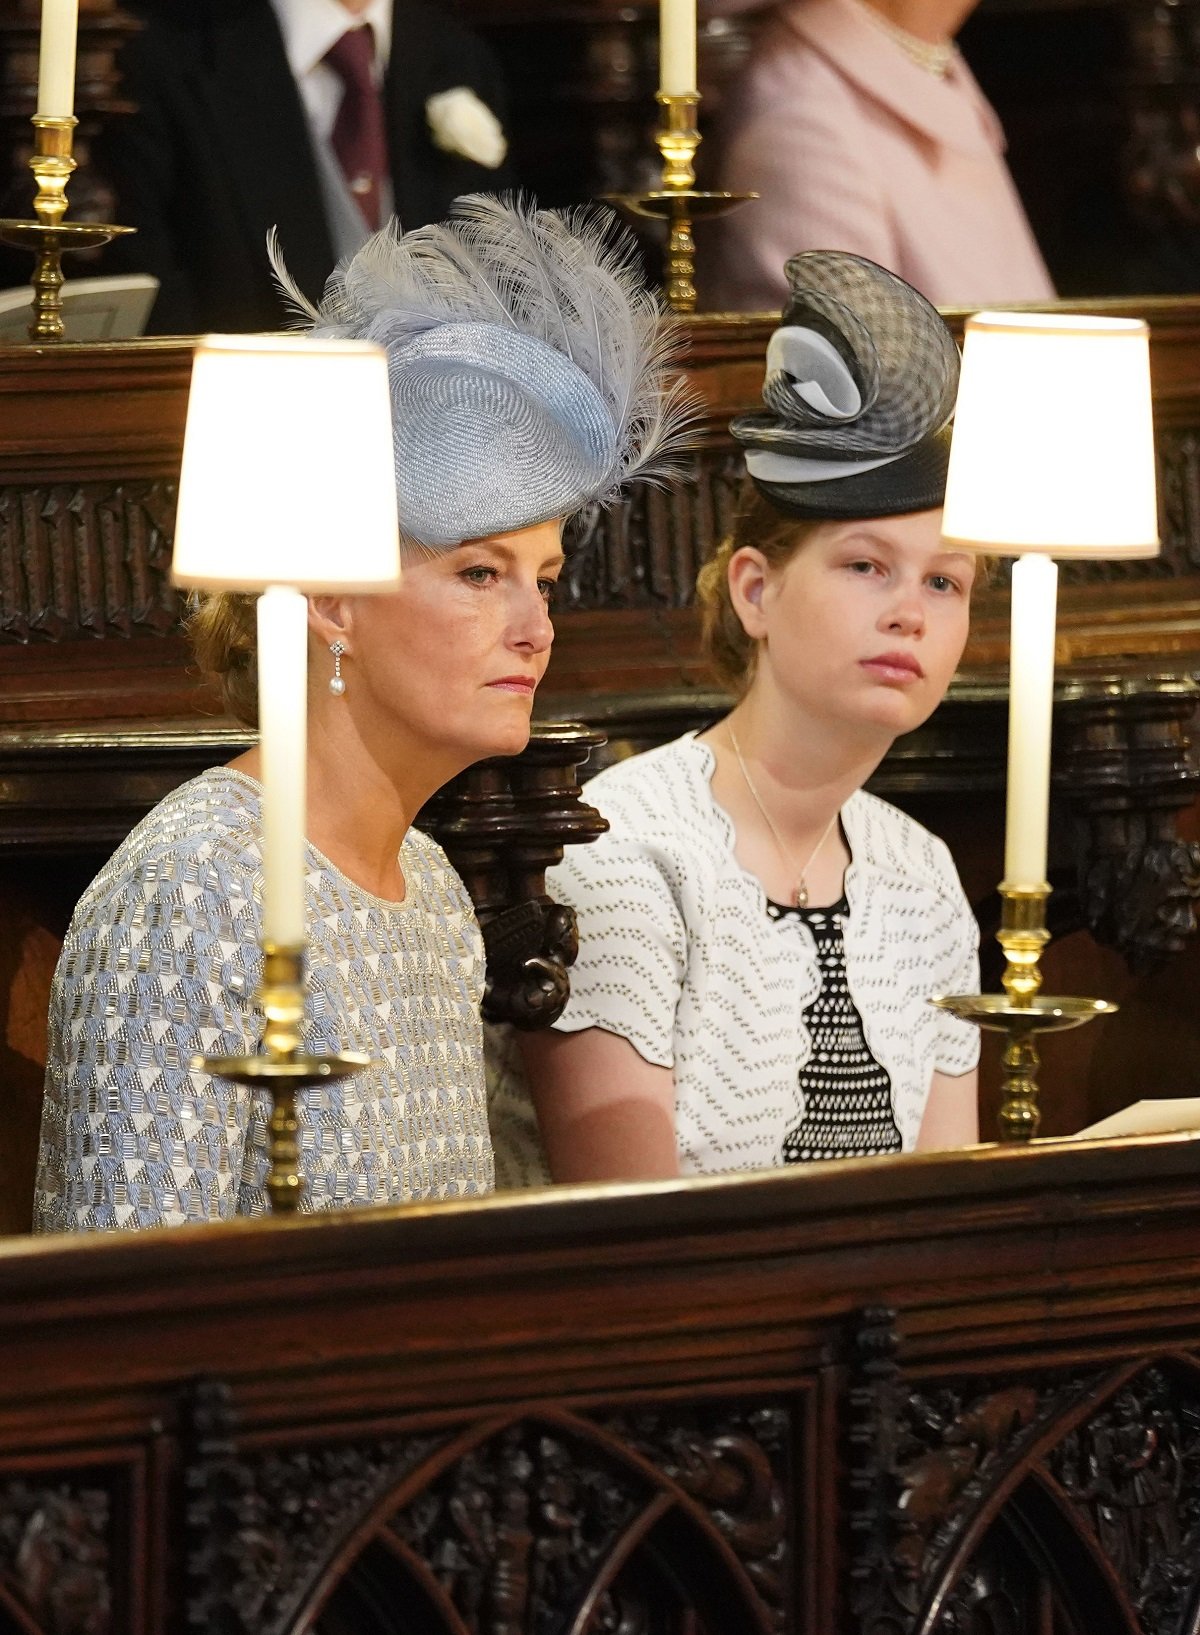 Sophie, Countess of Wessex and her daughter, Lady Louise Windsor, seated inside St. George's Chapel for Prince Harry and Meghan Markle's wedding